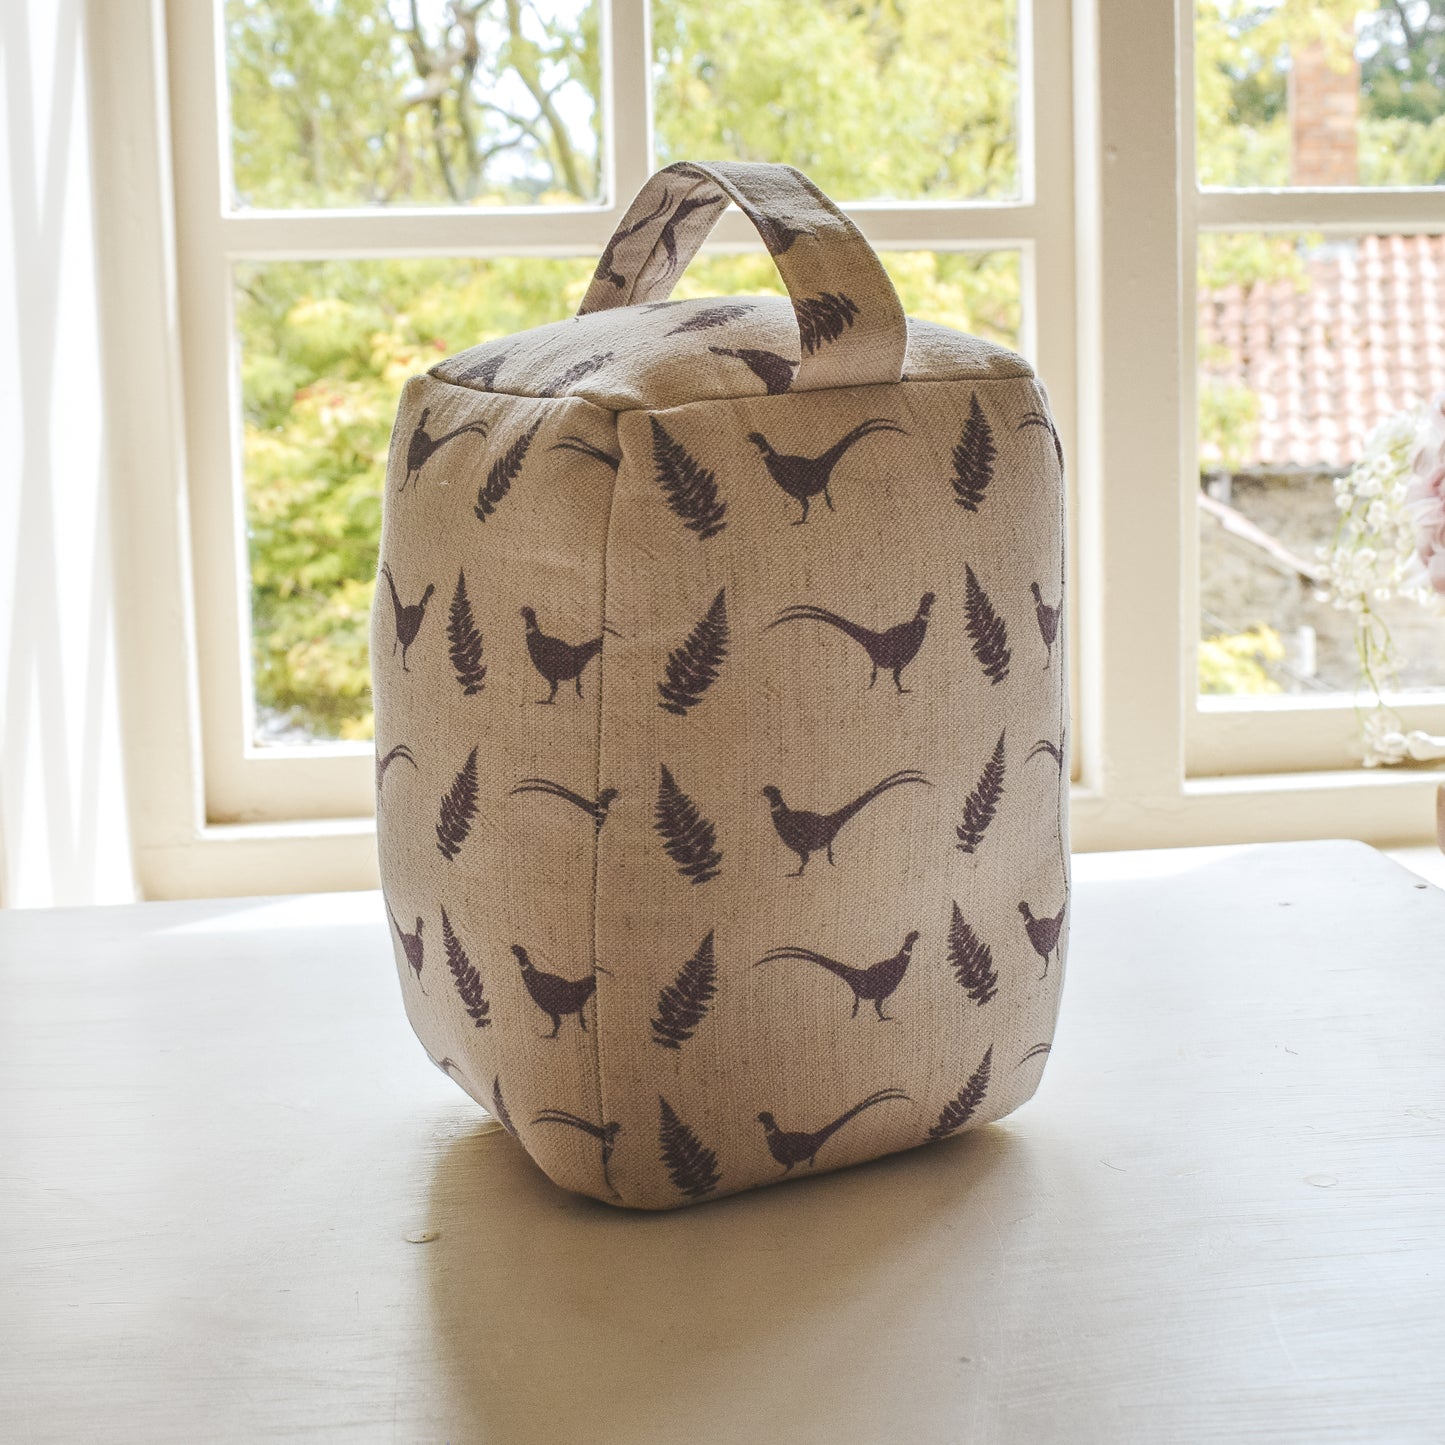 Grey Pheasant & Fern Print Doorstop - Handmade in Yorkshire and Designed by F&B - Pheasant Door Stop Country Living Country Home Decor